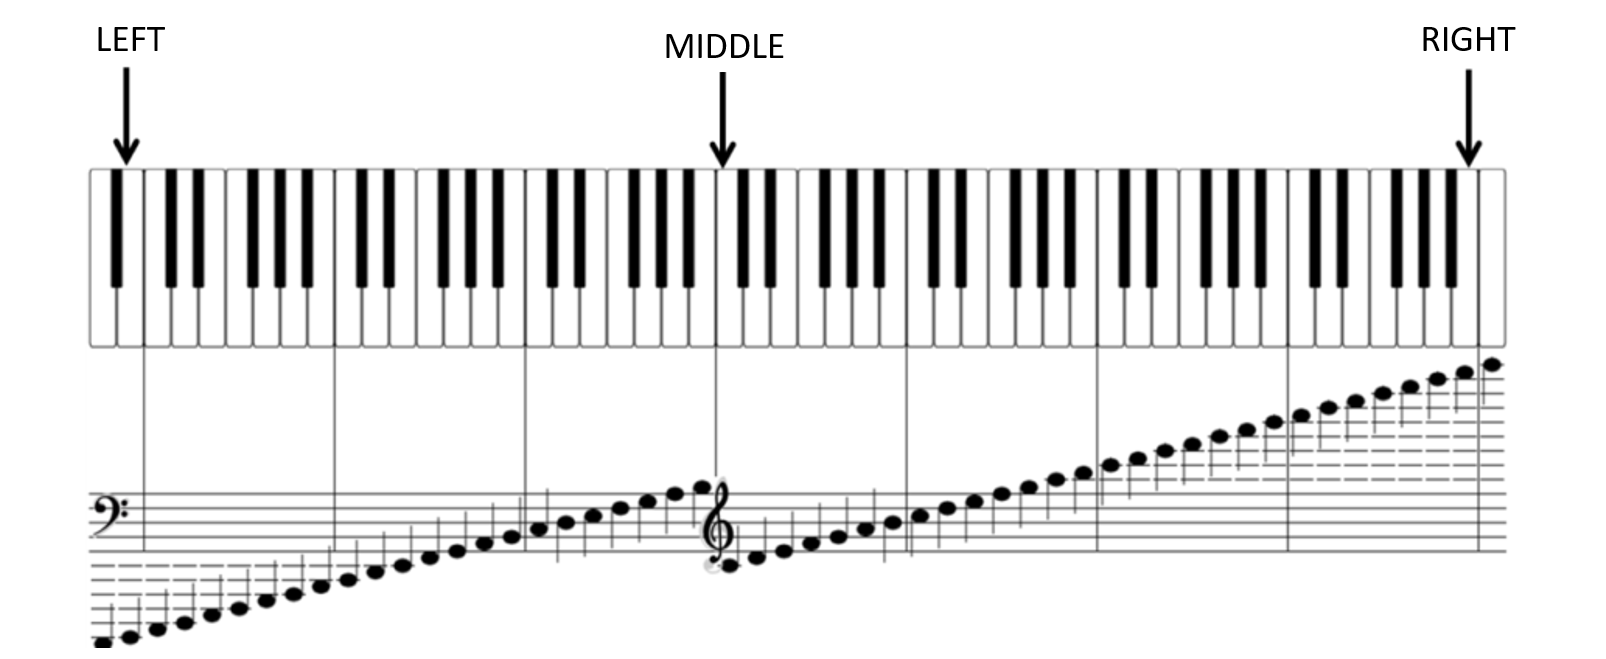 piano-location-notes-right-middle-left-simplifying-theory